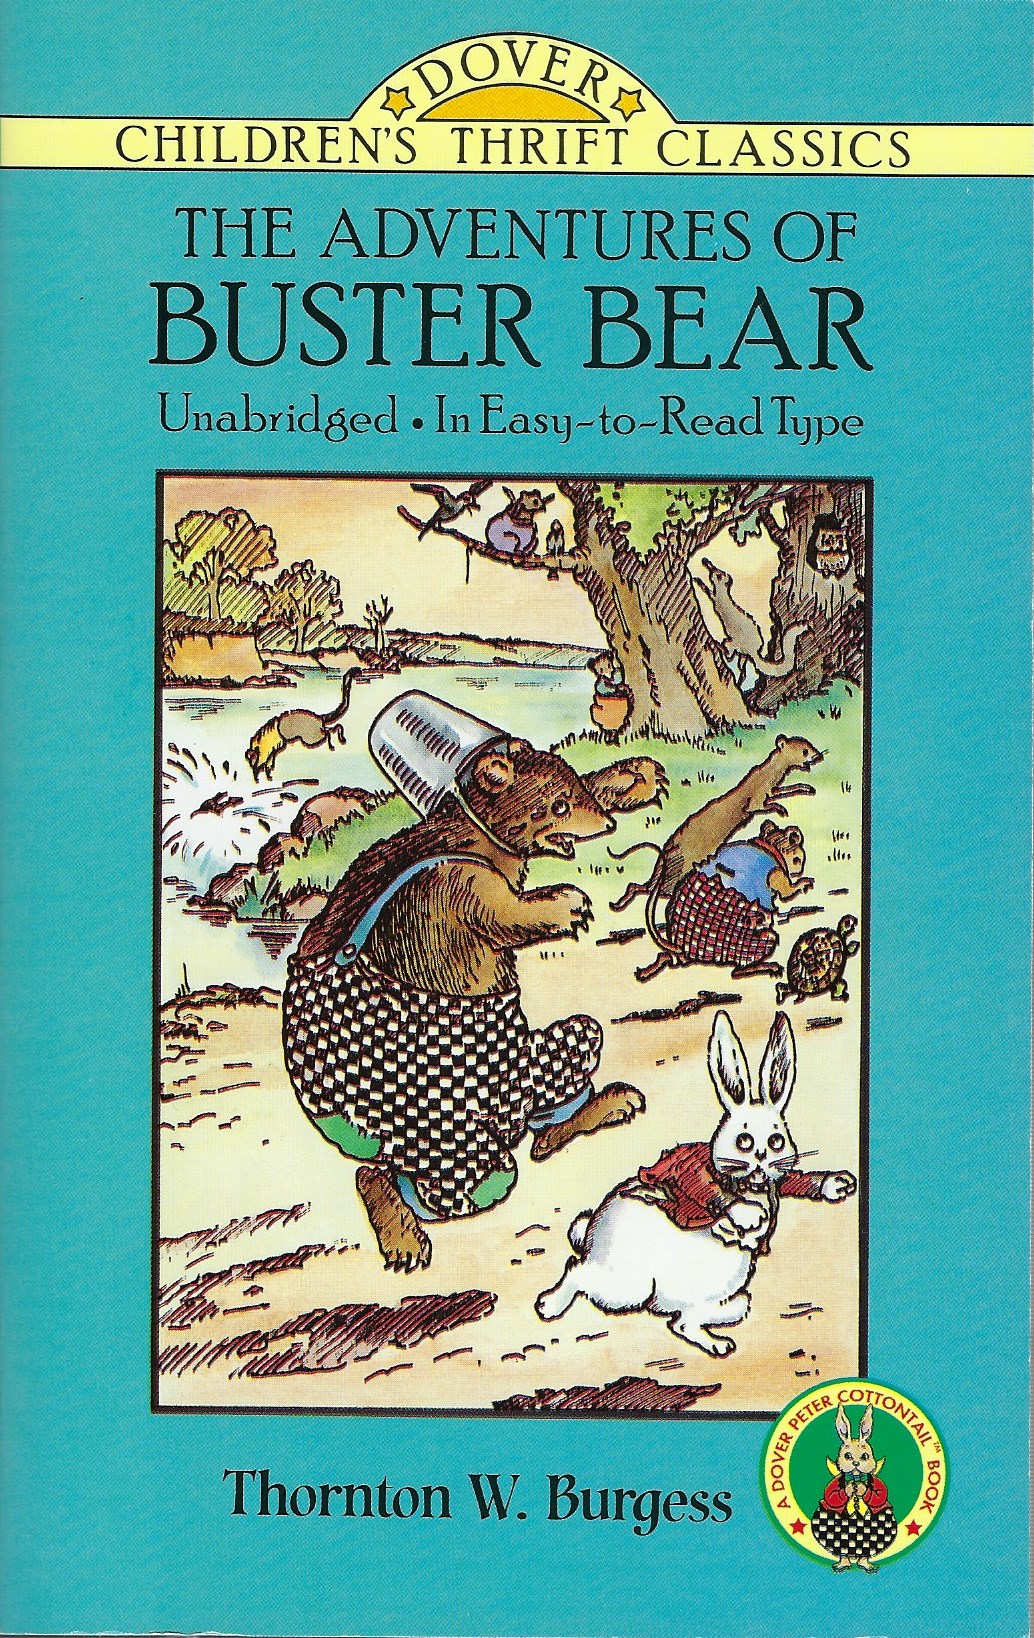 THE ADVENTURES OF BUSTER BEAR Thornton W. Burgess